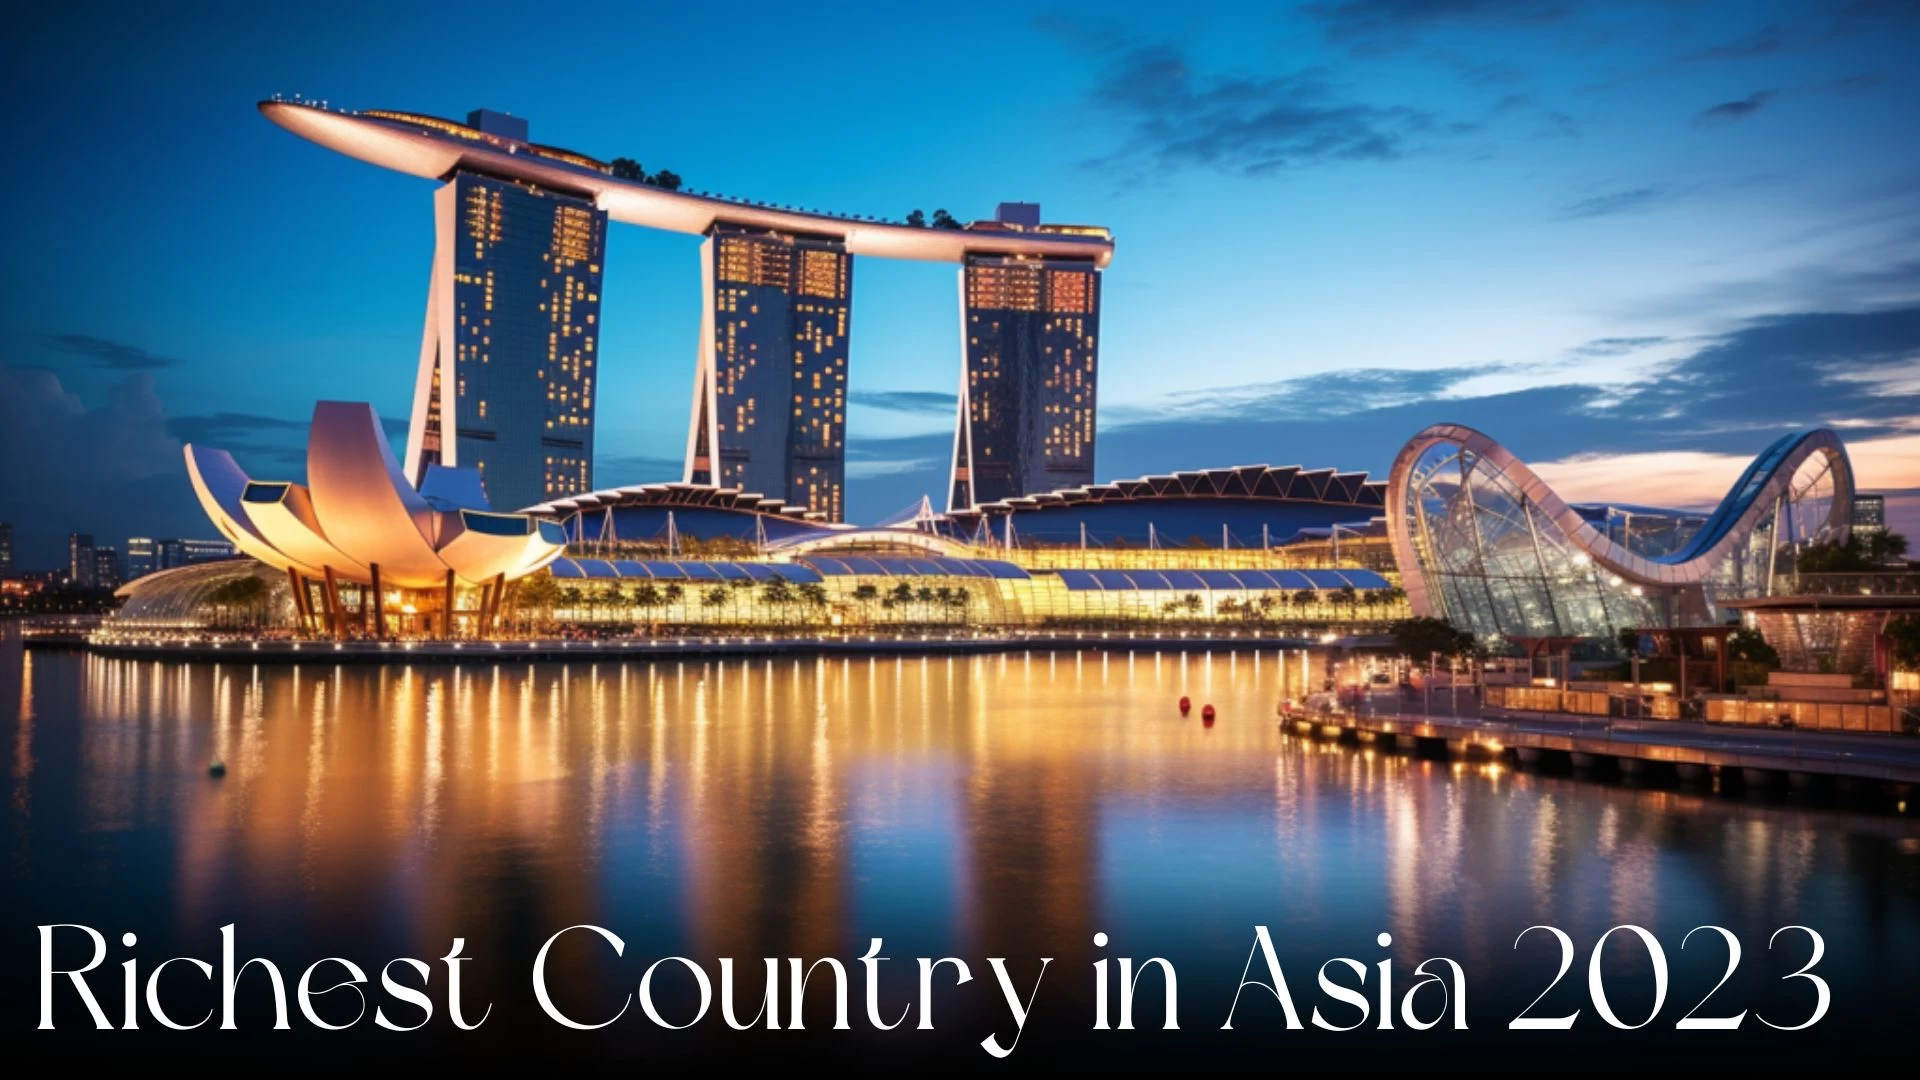 Richest Country in Asia 2023 - Top 10 Wealthiest Nations